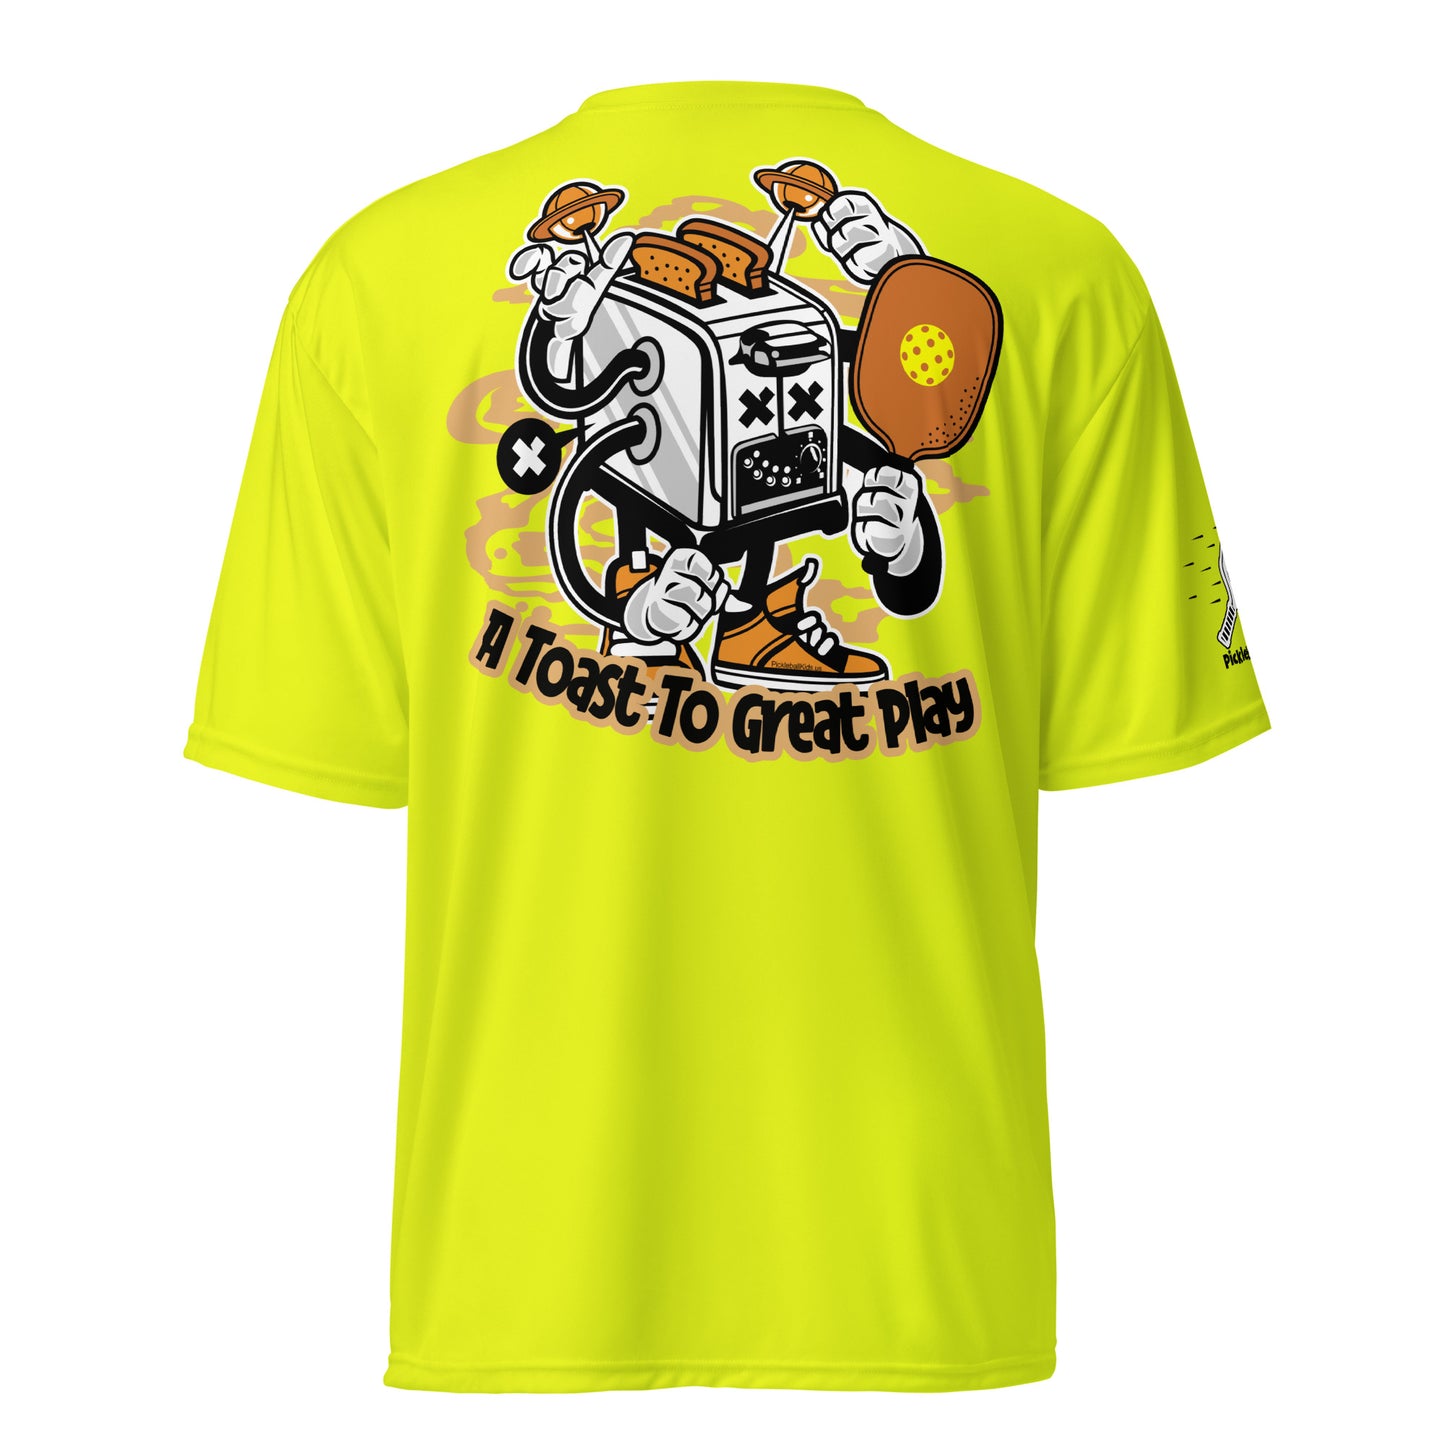 Pickleball Big Kids "A Toast To Great Play", Unisex Performance Crew Neck T-Shirt